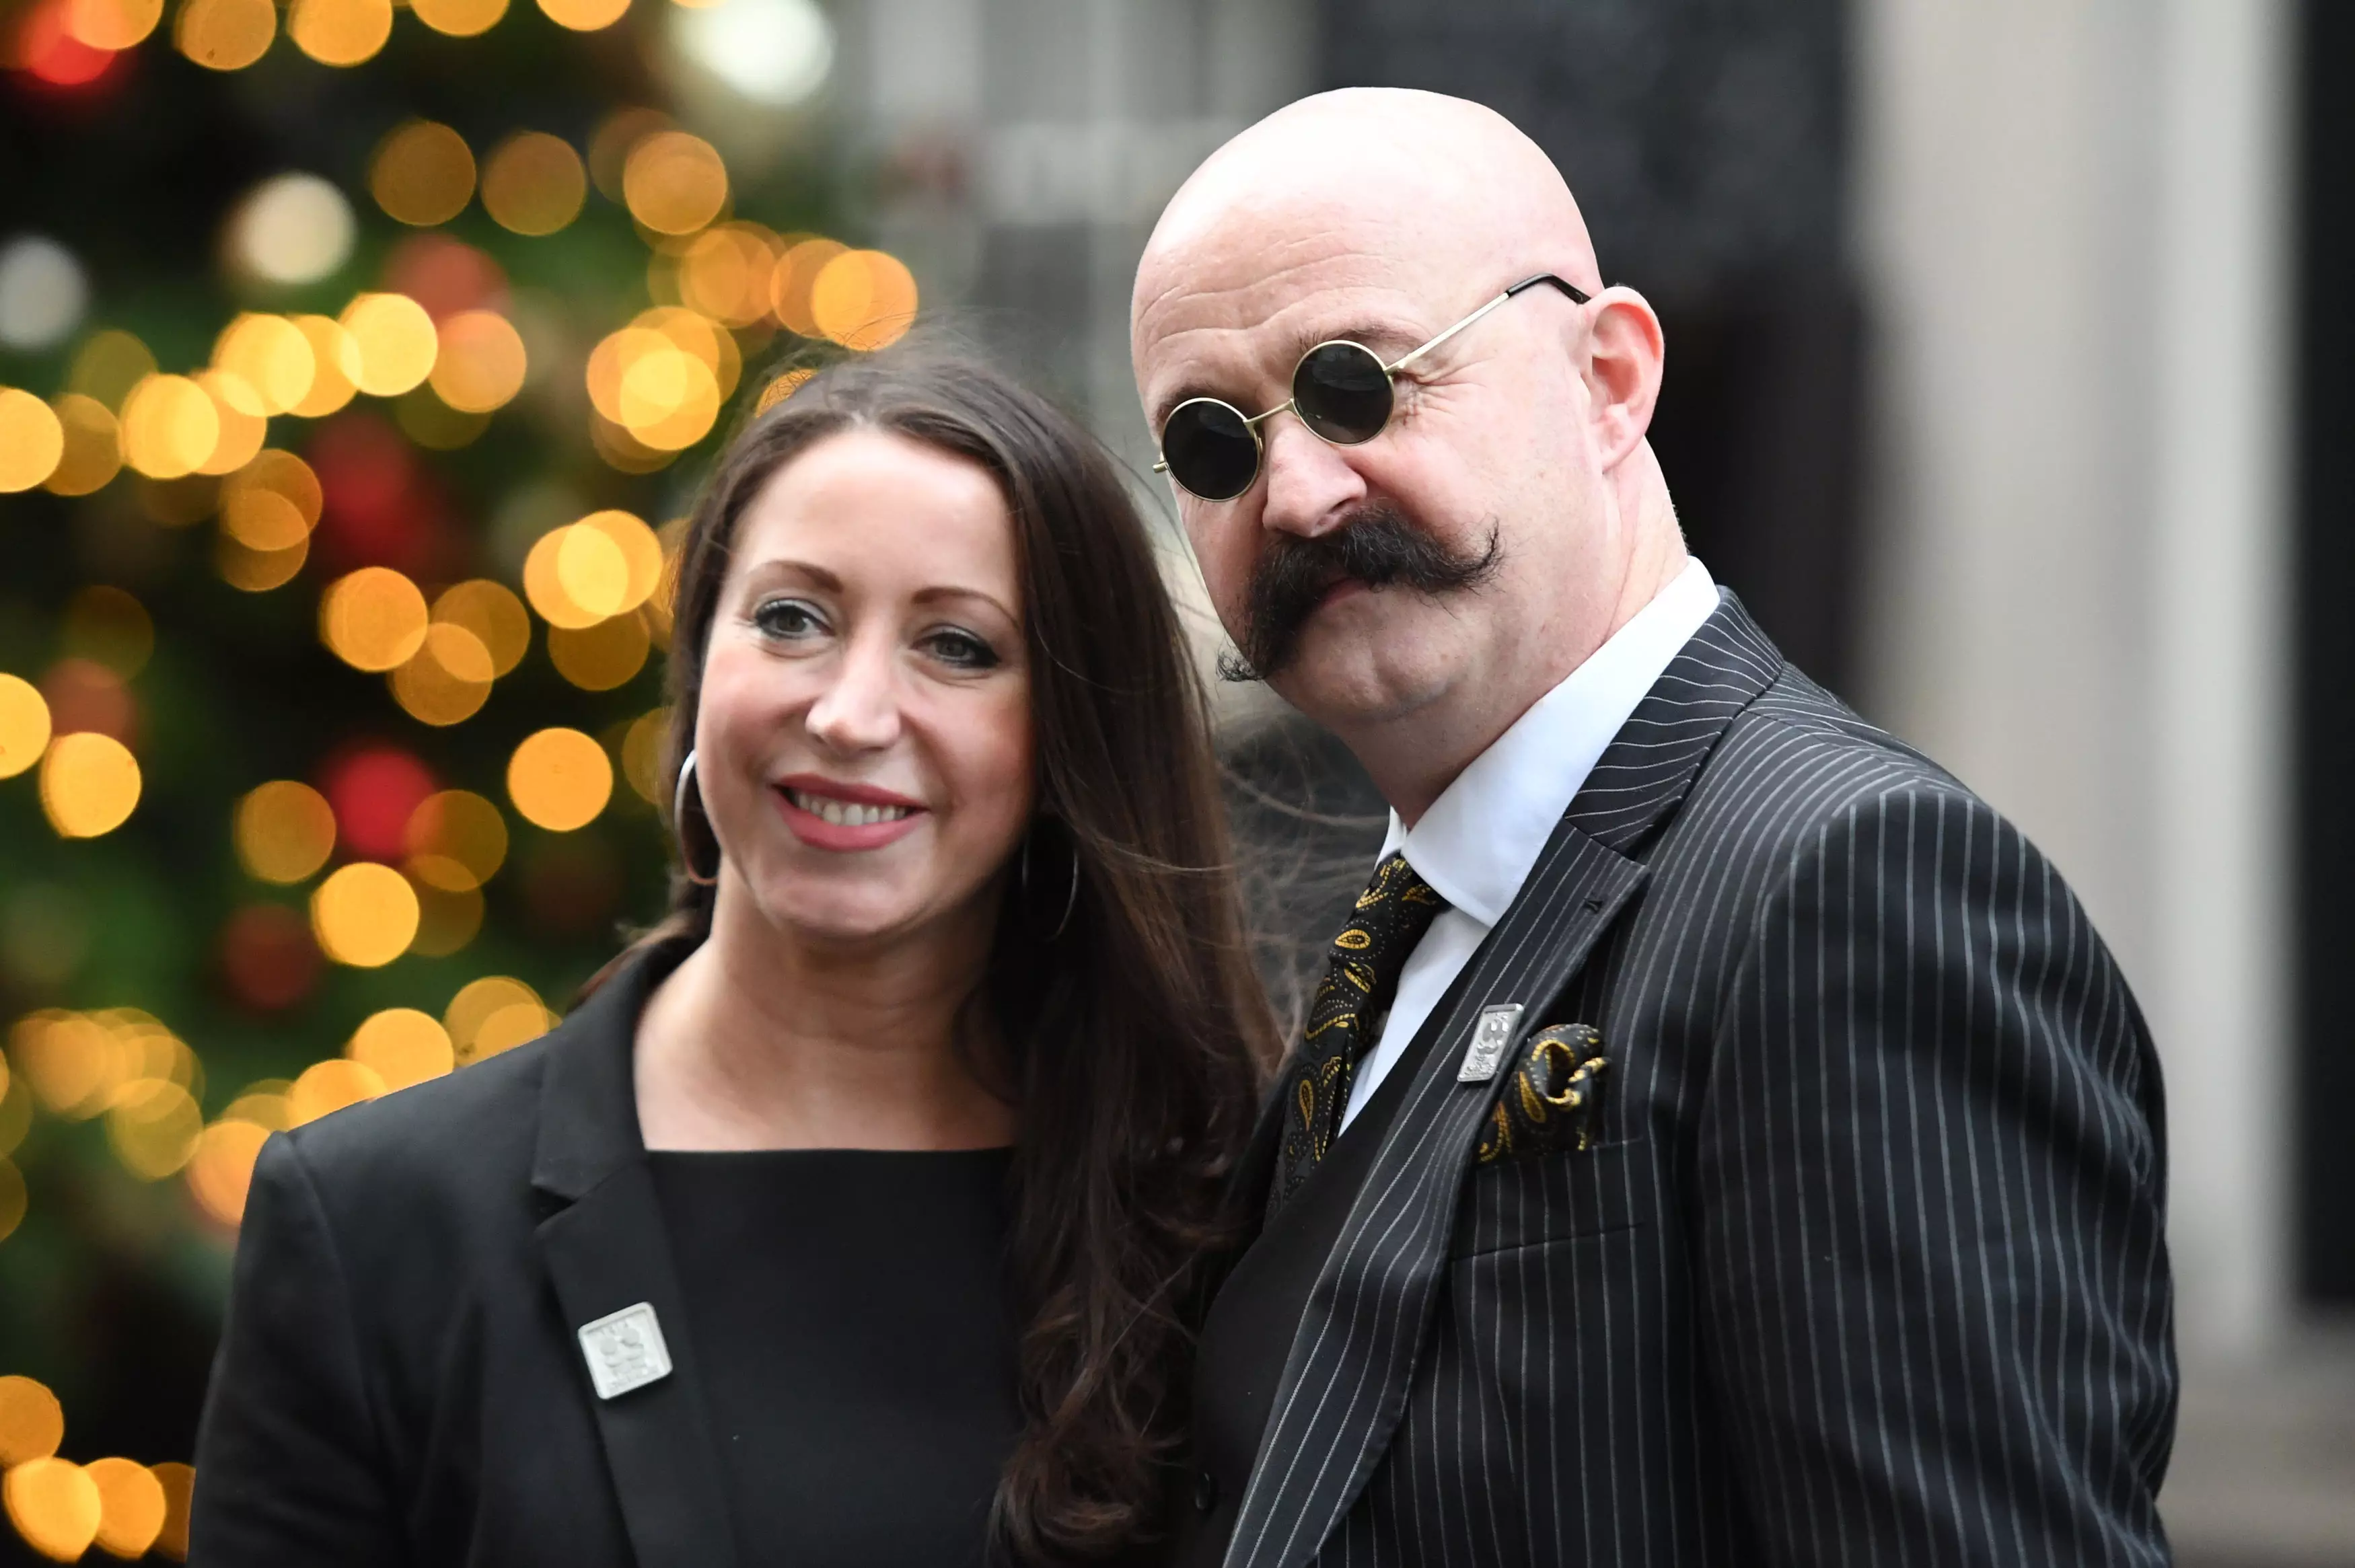 Williamson with a Charles Bronson lookalike outside Downing Street.